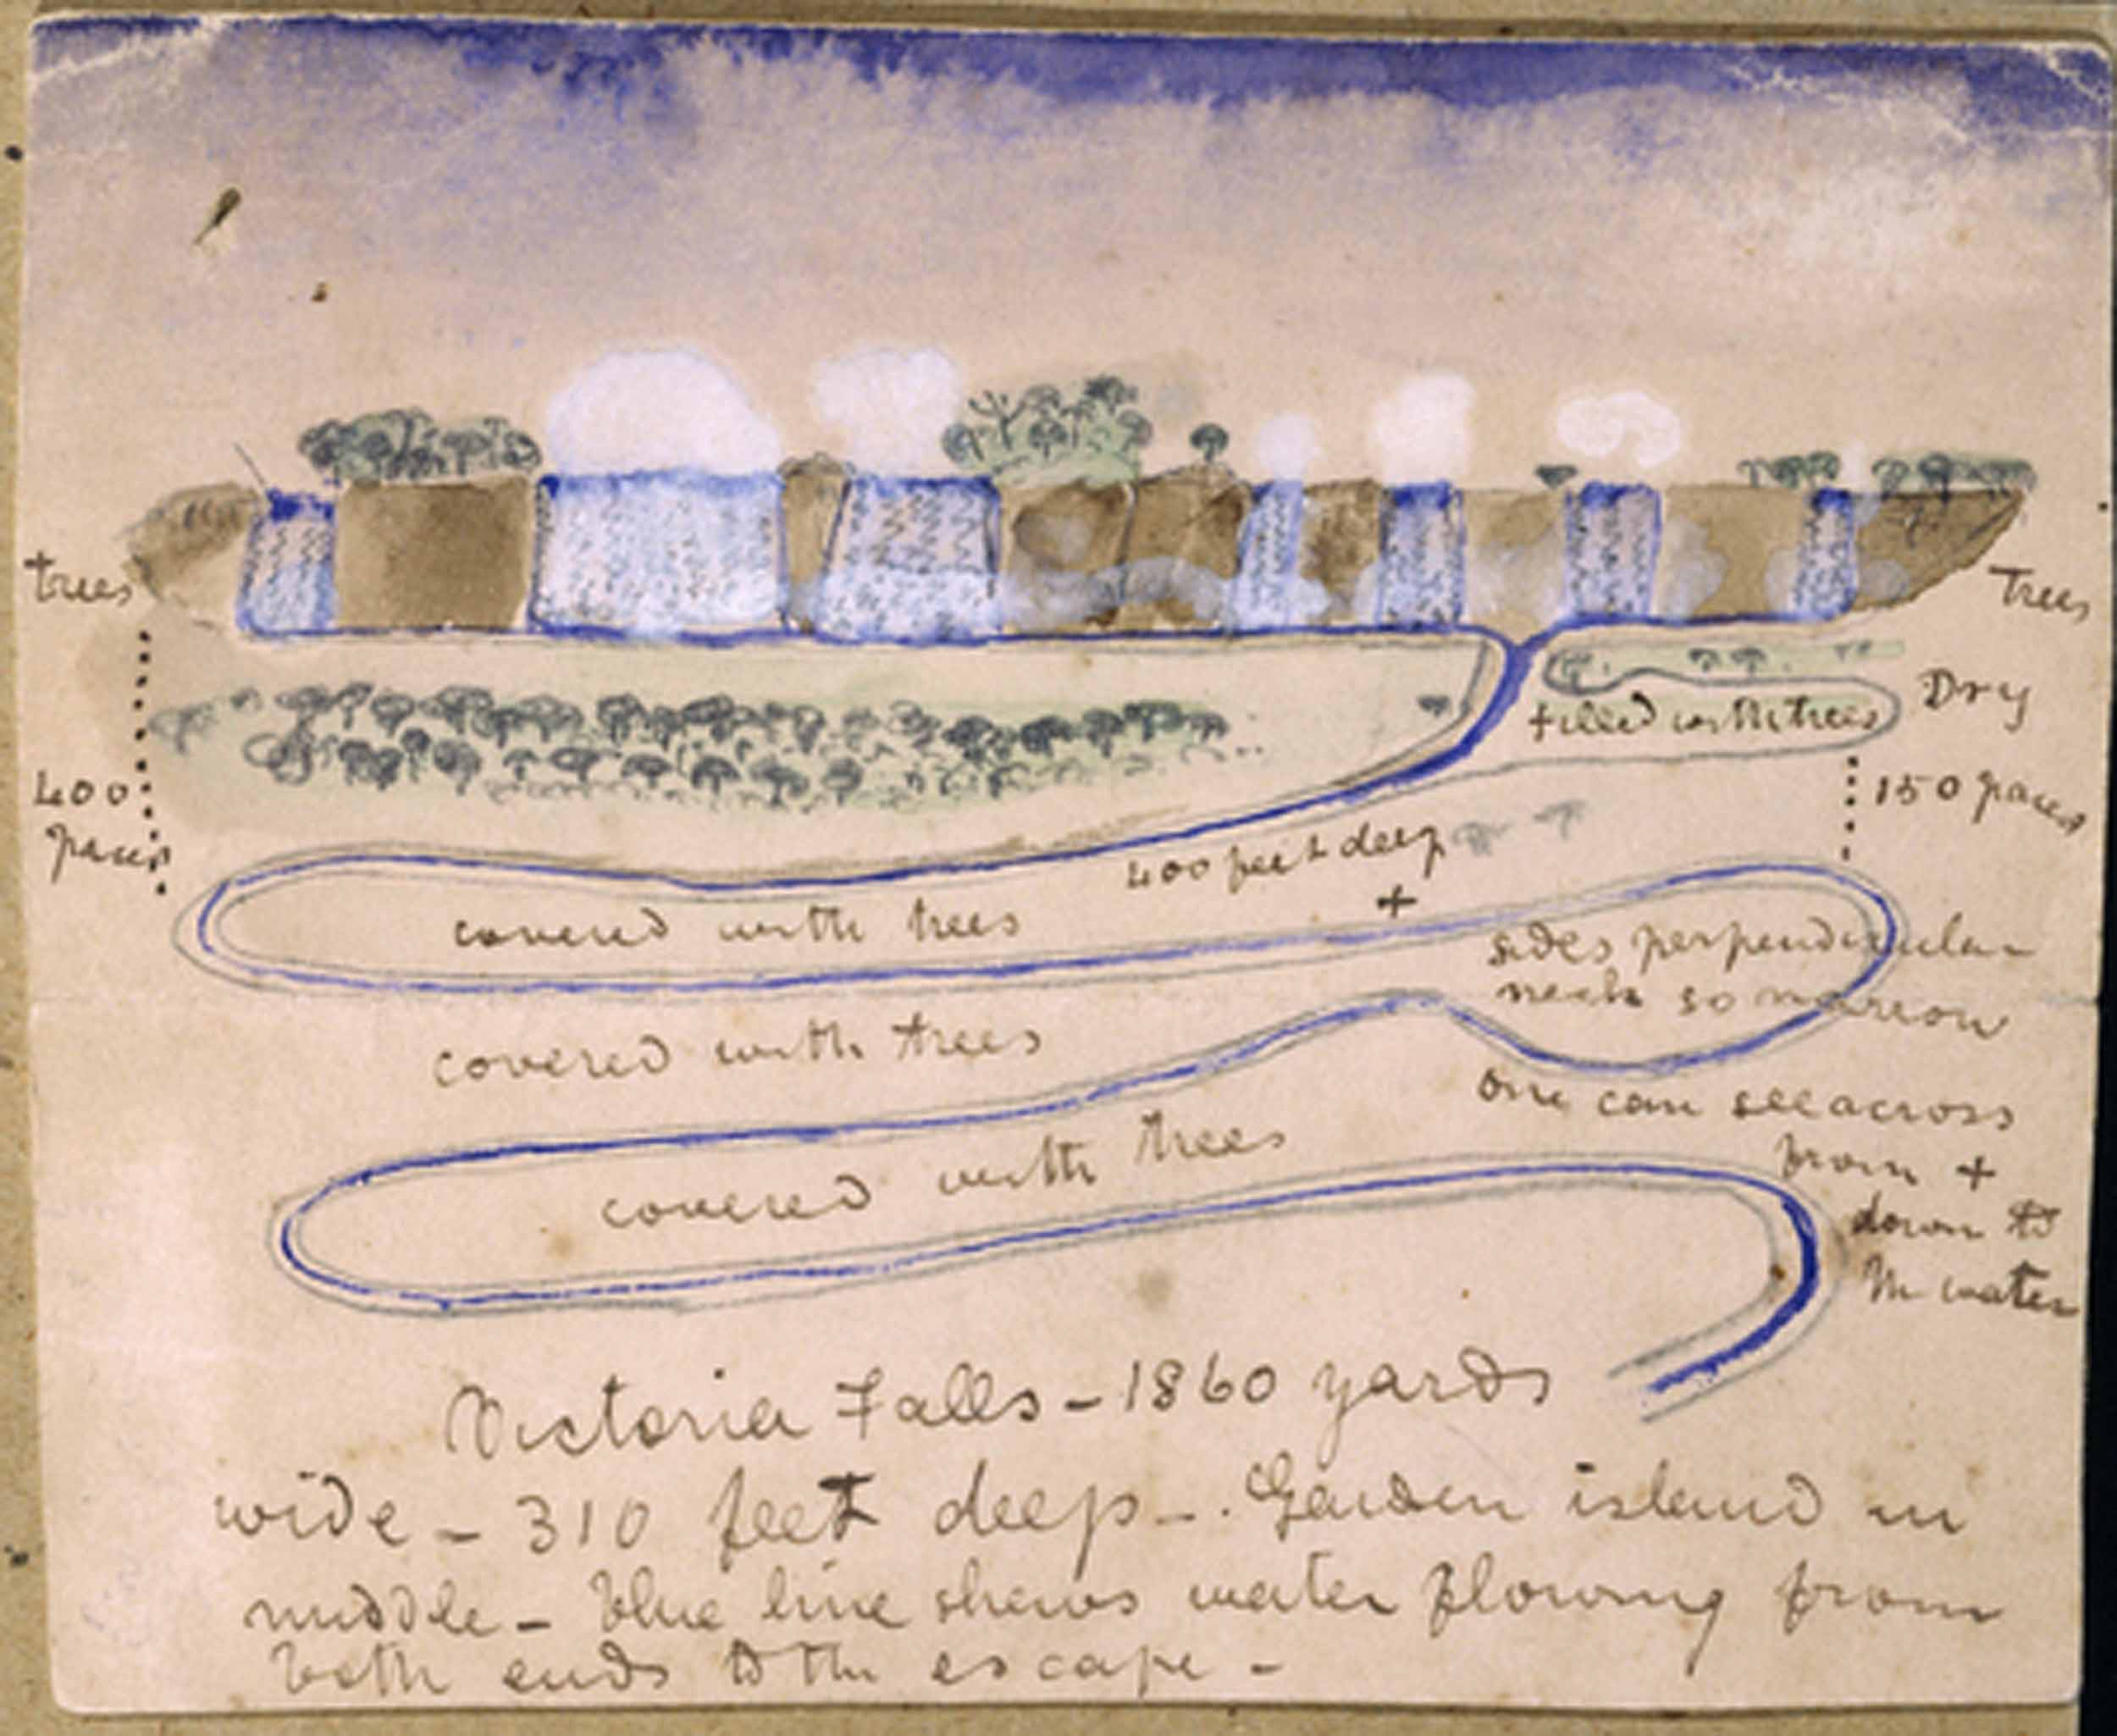 Sketch of the Victoria Falls, 1850-1860, by David Livingstone. Copyright Royal Geographical Society (with IBG). Used by permission for academic purposes only. For non-academic use permission, please contact the Picture Library.